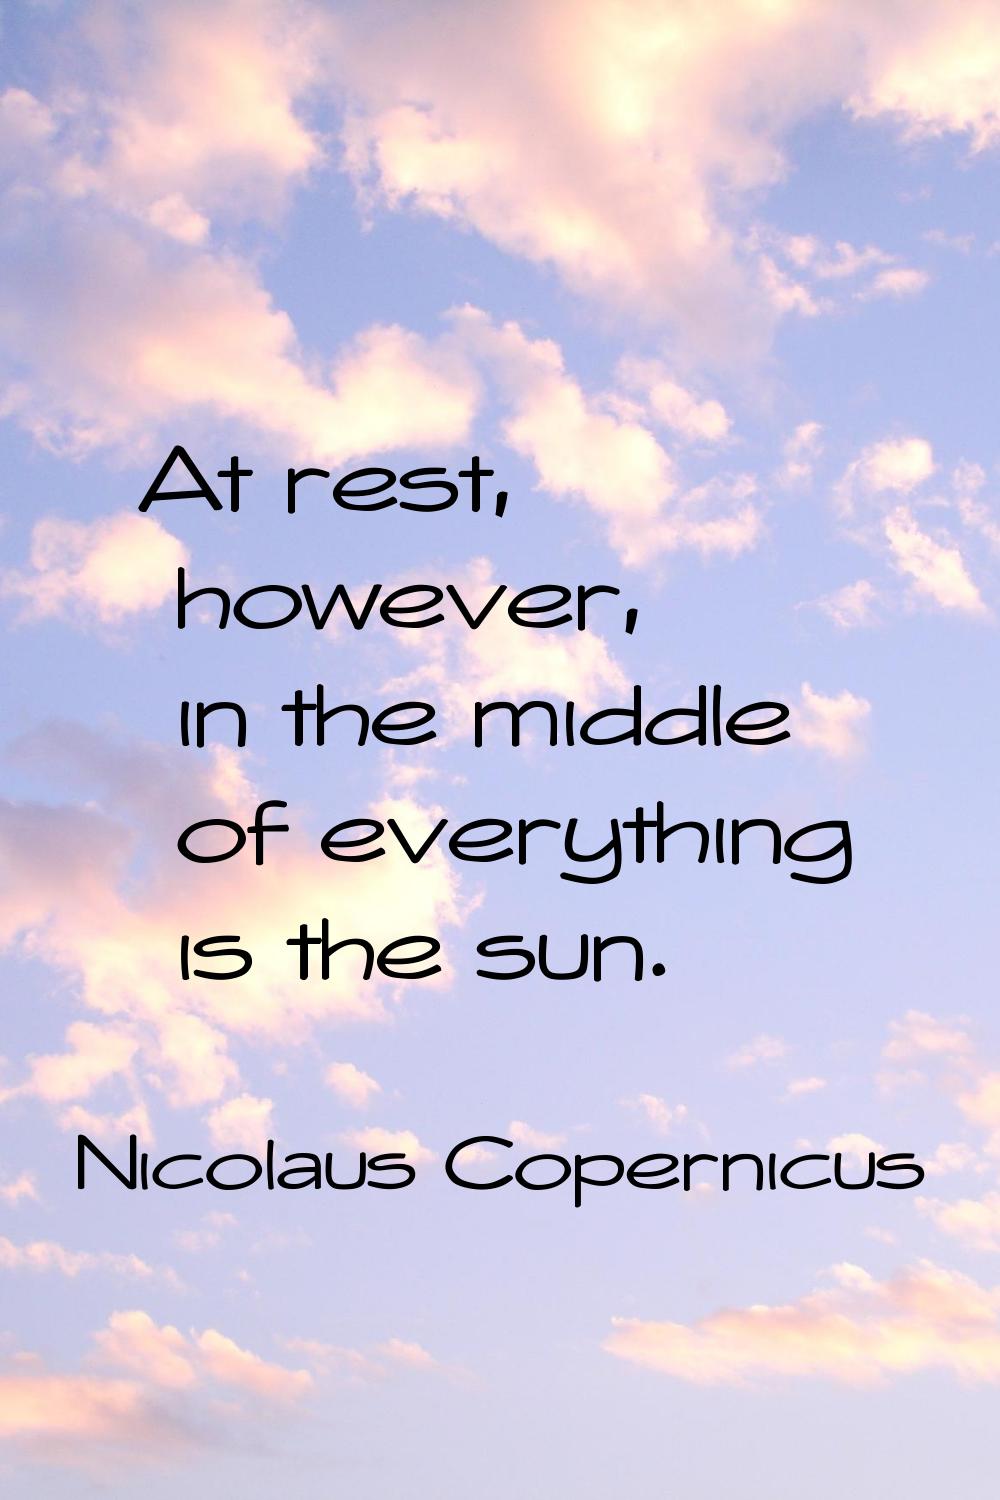 At rest, however, in the middle of everything is the sun.